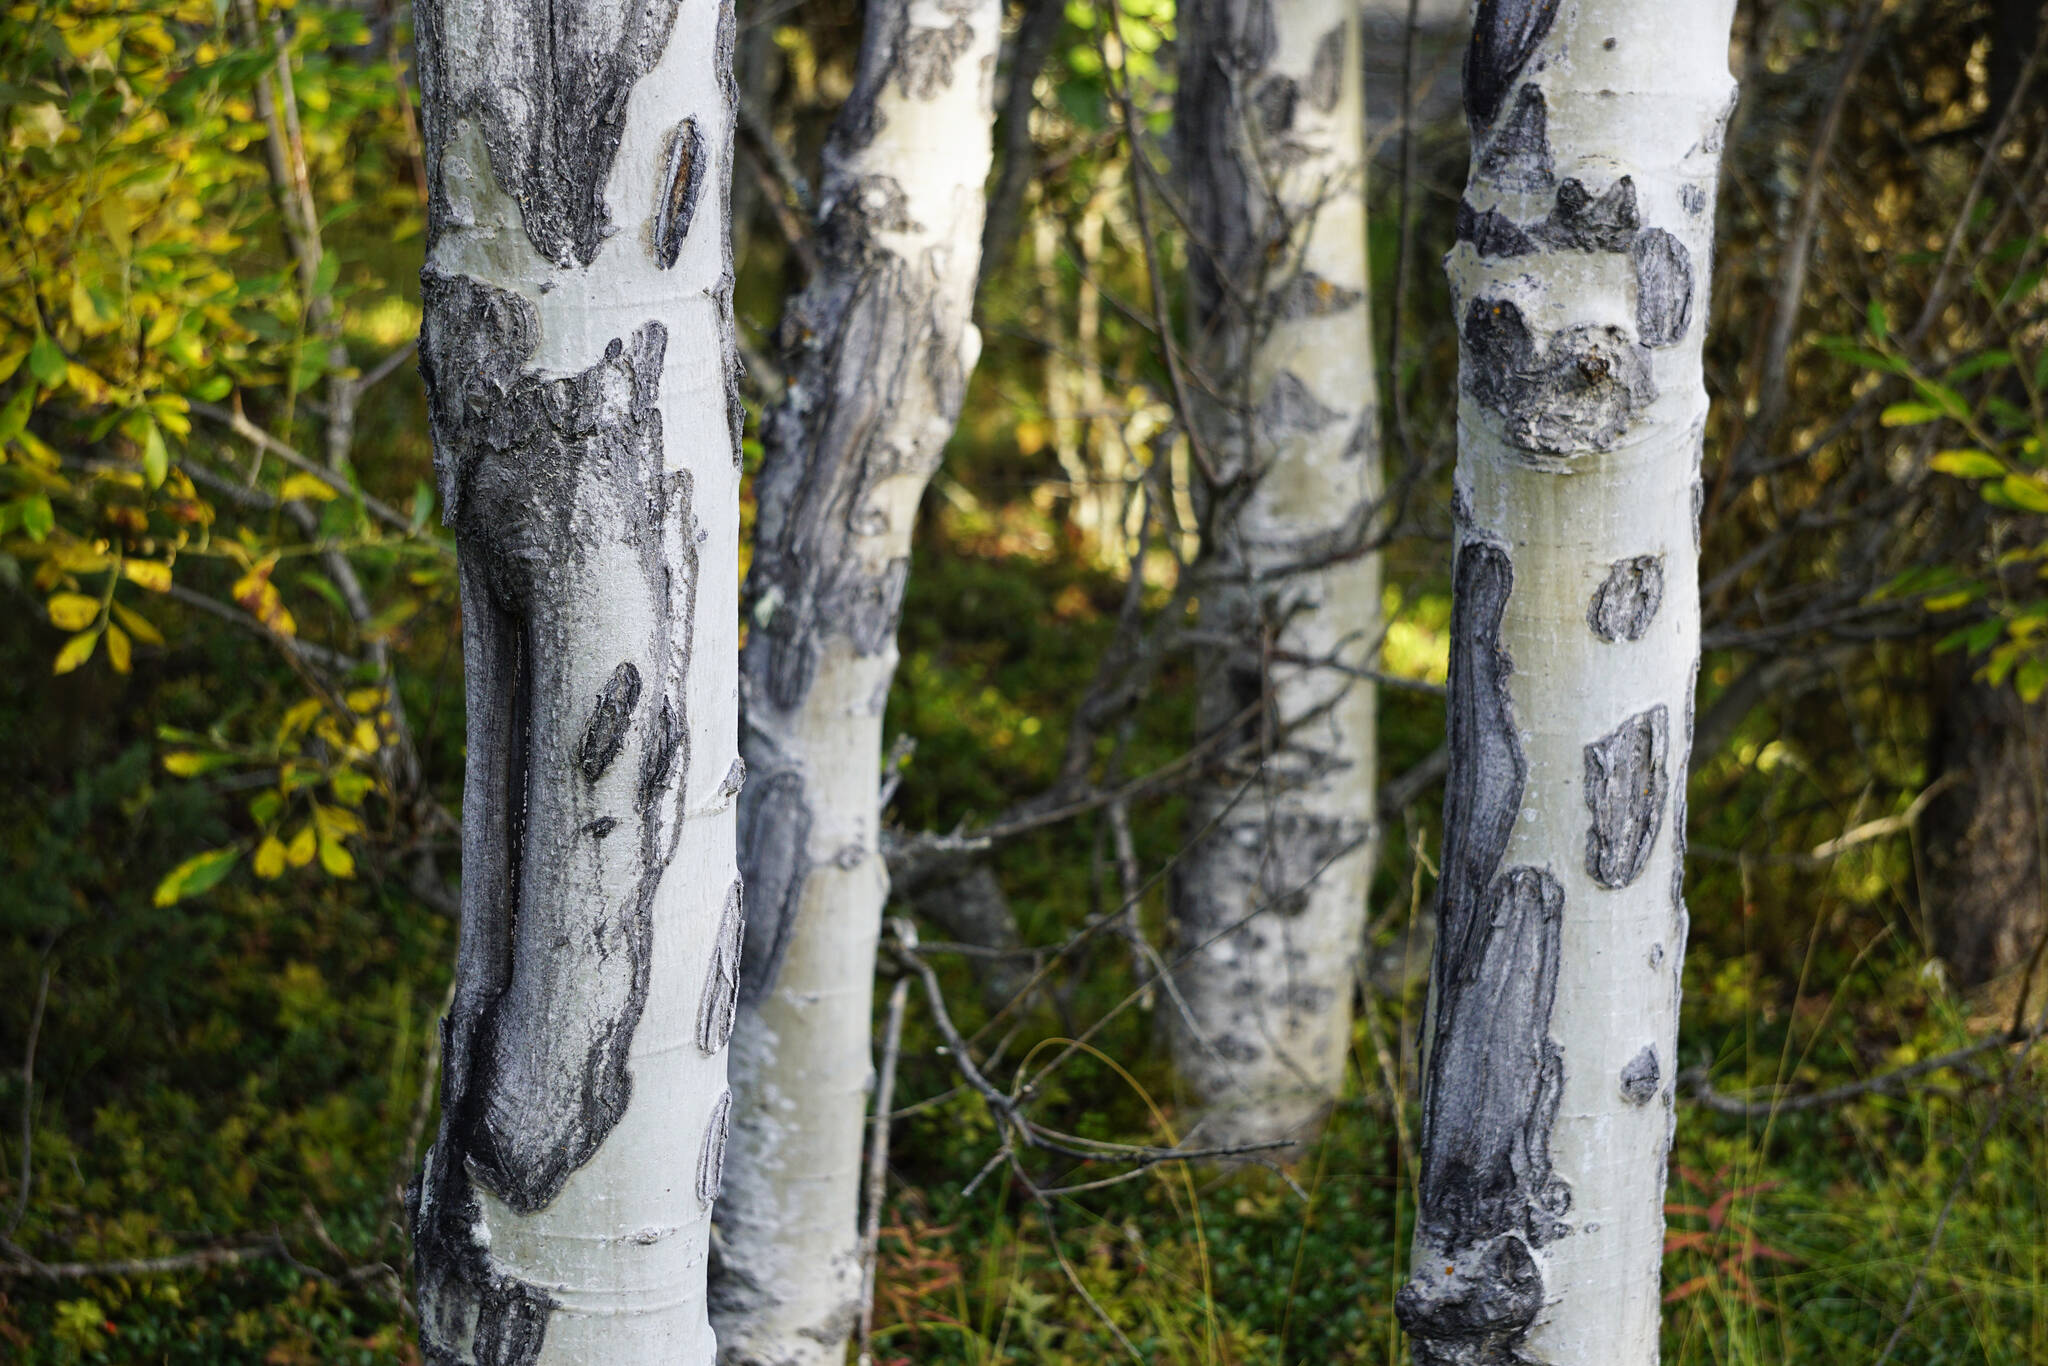 Scars on birch trees create abstract shapes on Saturday, Sept. 11, 2021, at the Hidden Lake Campground in the Kenai National Wildlife Refuge near Sterling, Alaska. (Photo by Michael Armstrong/Homer News)